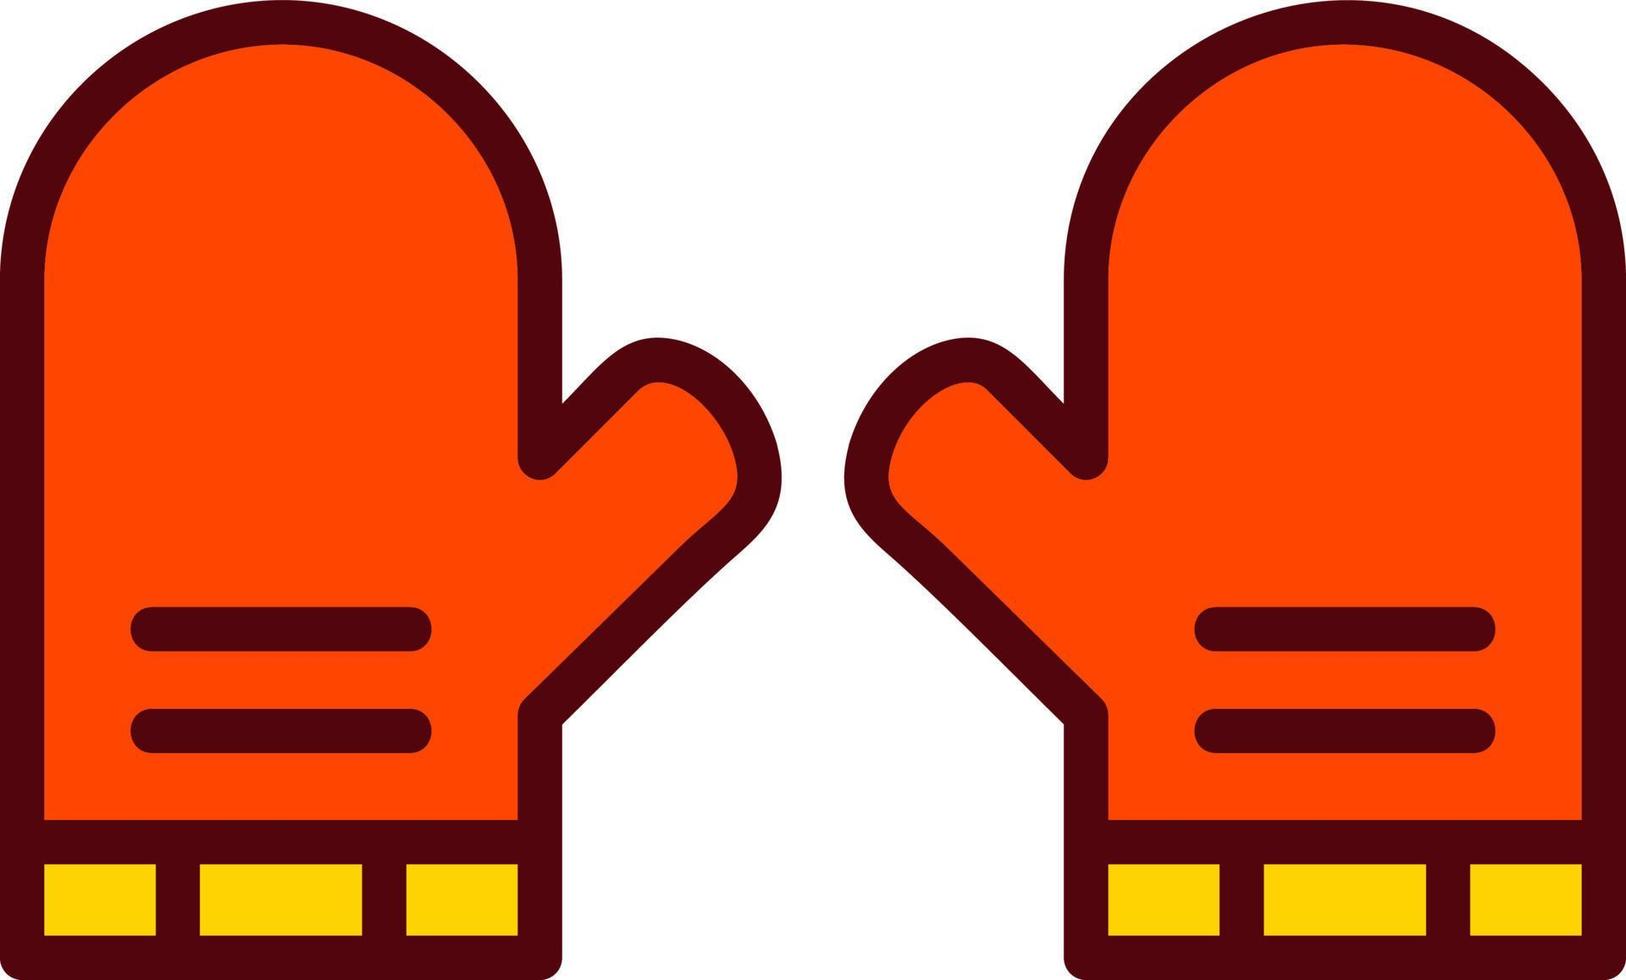 Oven Mitts Vector Icon